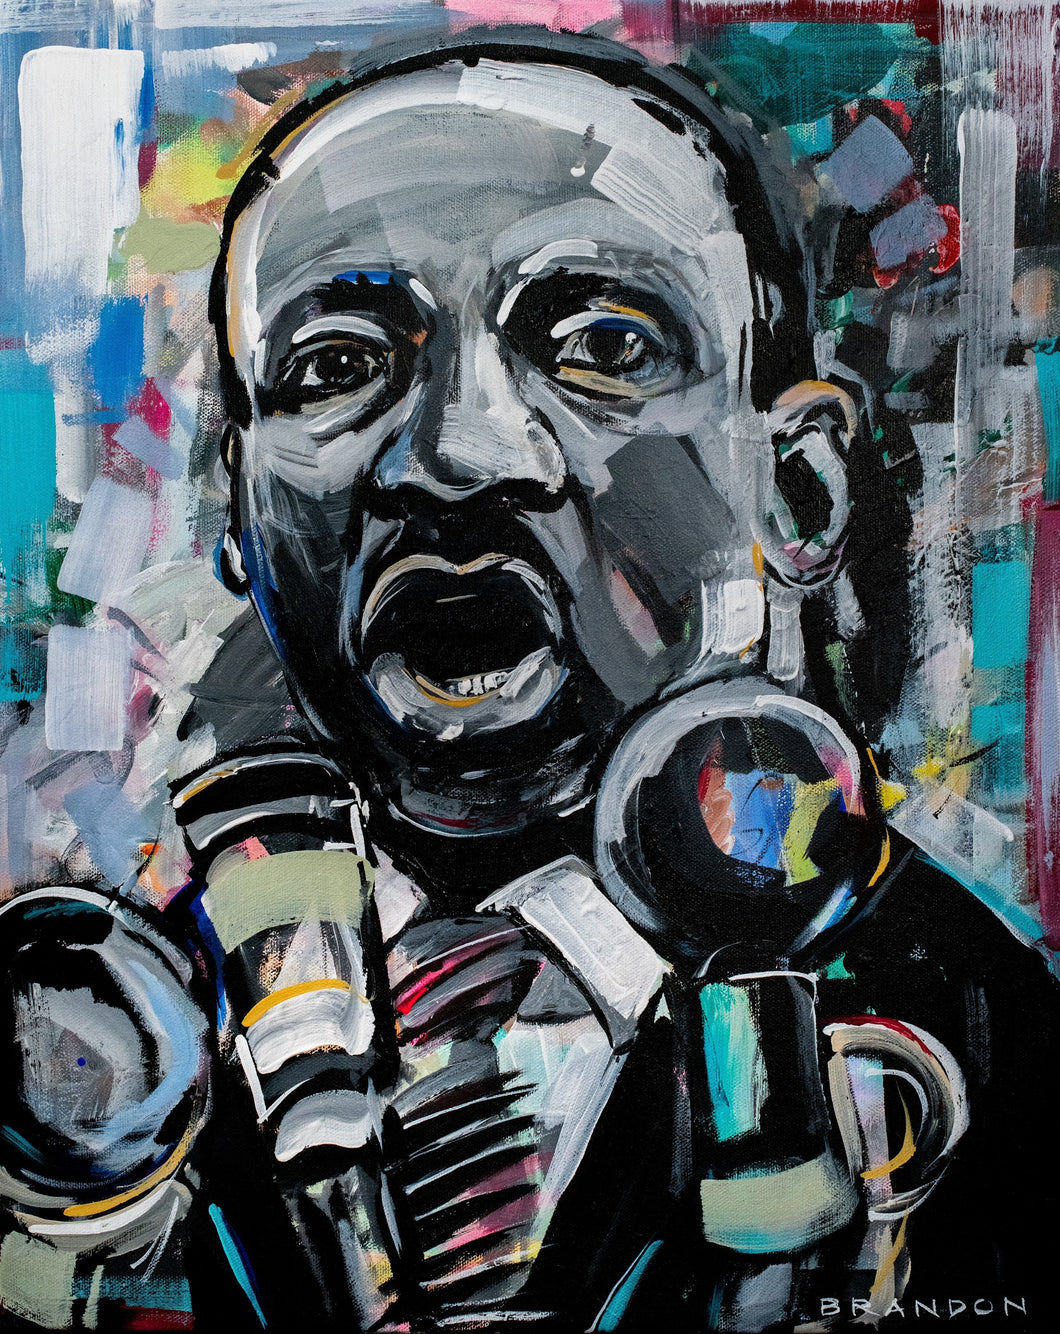 Dr. Martin Luther King Jr. MLK The “City Too Busy To Hate” - Painting Print